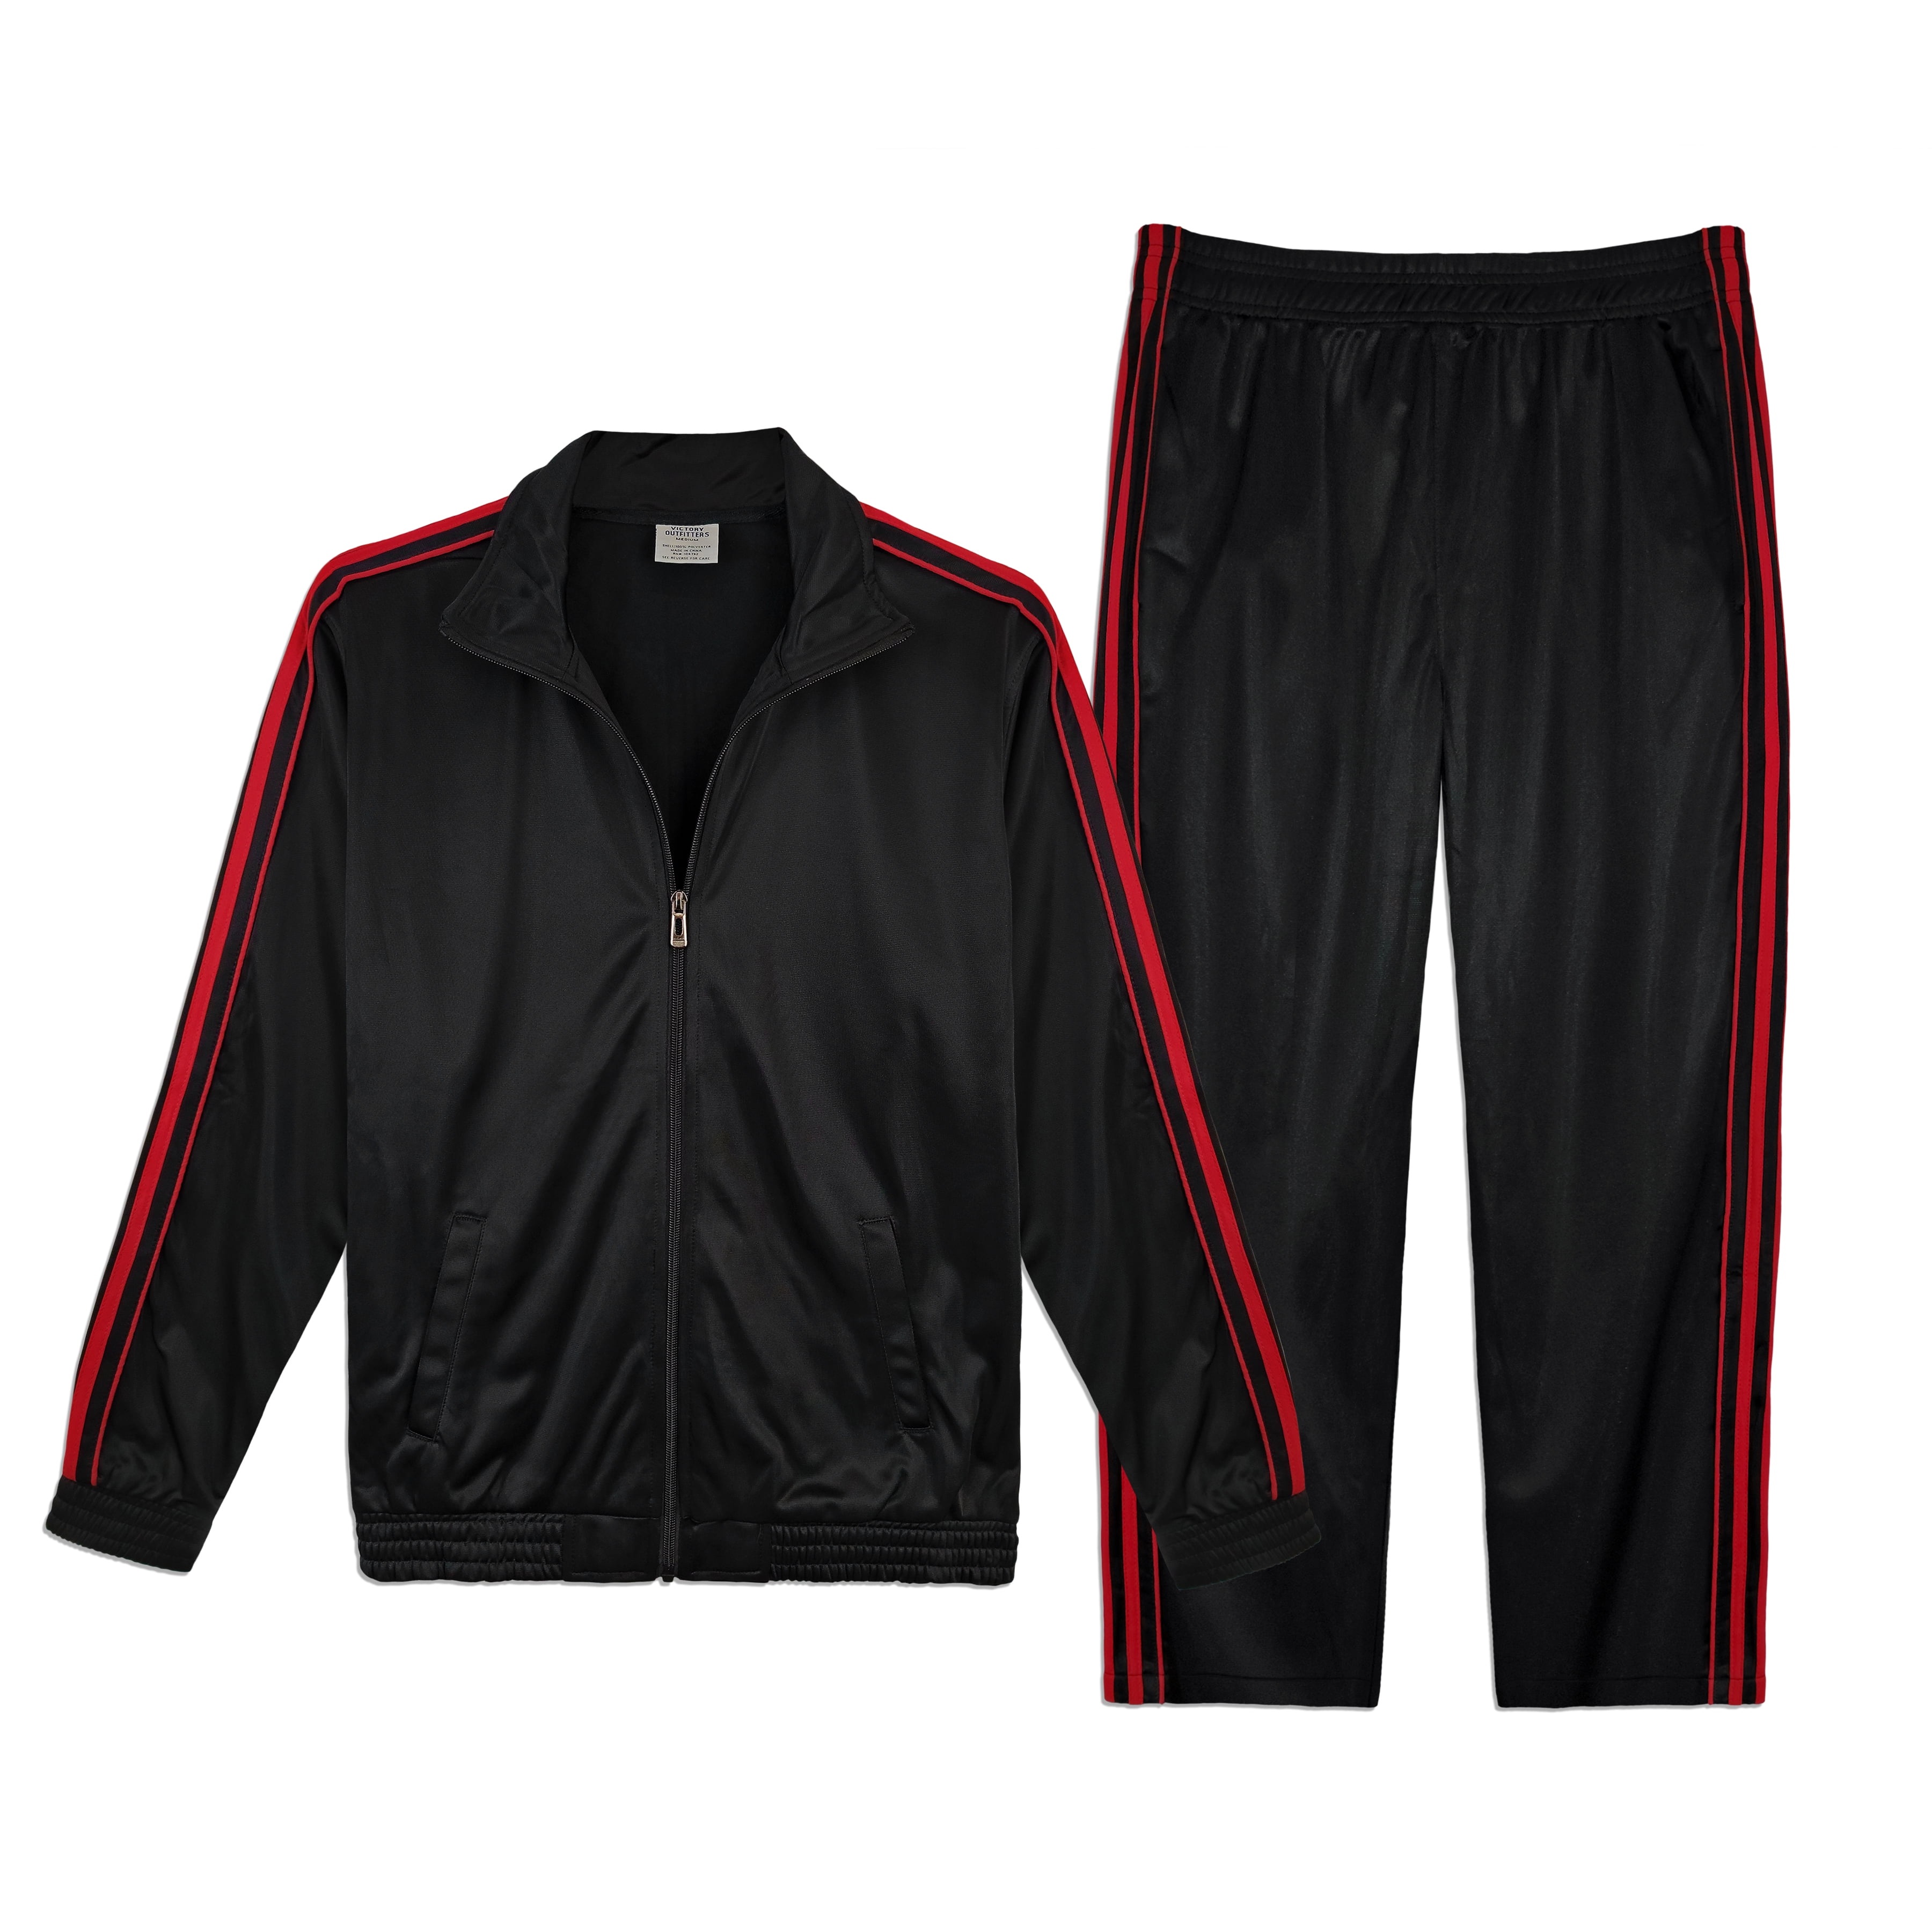 Victory Outfitters Men's Athletic Tricot Track Jacket and Matching Pants  Set - NVY/WHT - L